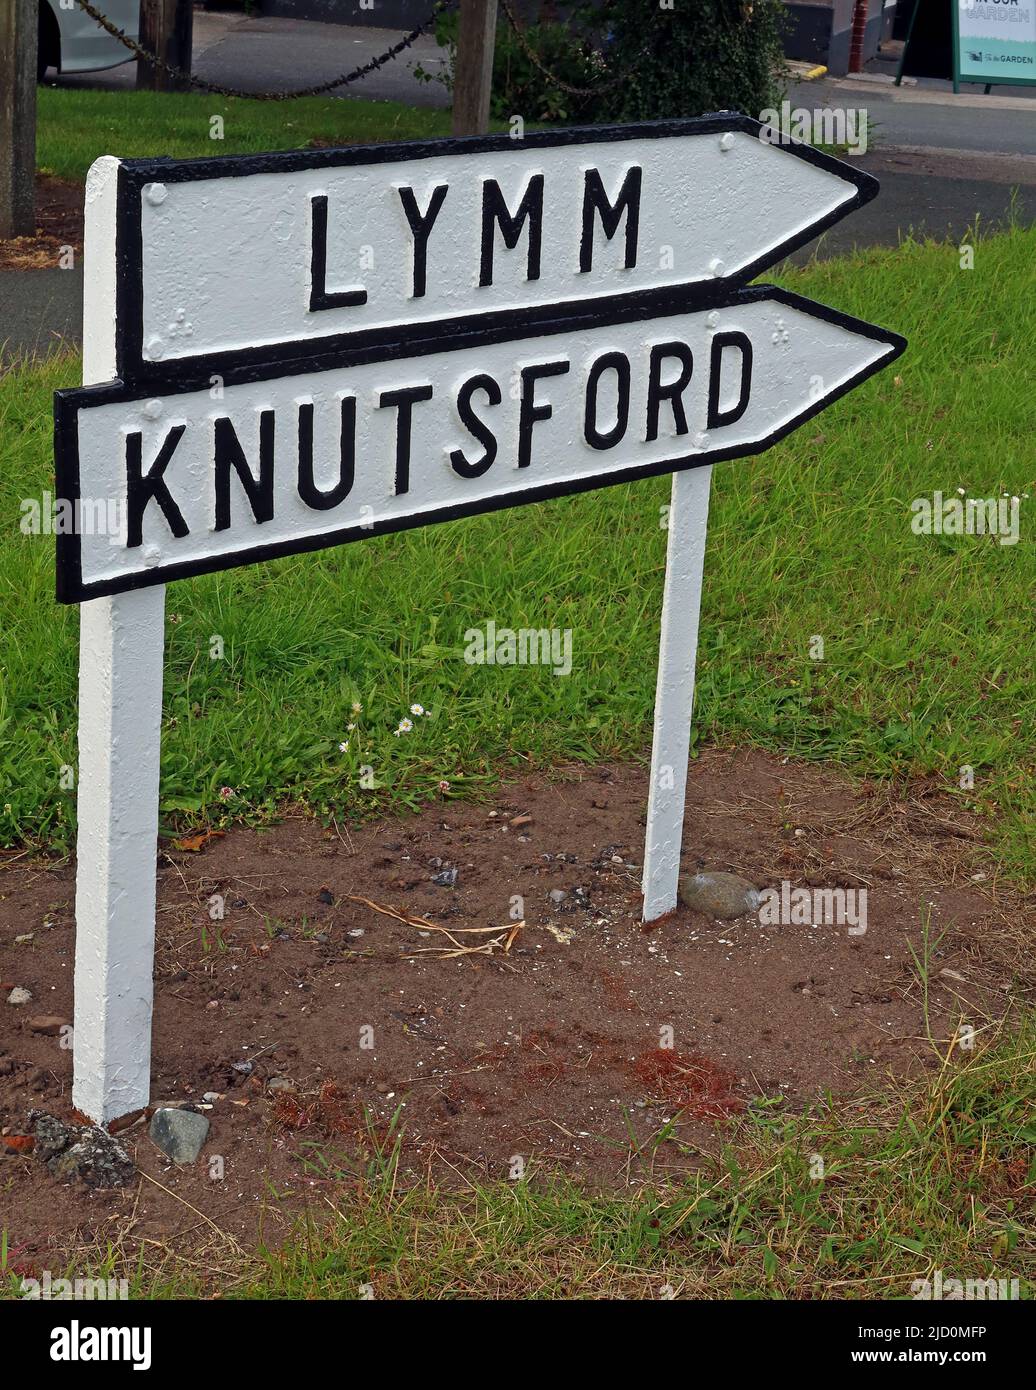 Lymm et Knutsford signent, Appleton Thorn Village, Warrington, cheshire, Angleterre, Royaume-Uni - Thelwall/lymm pour fusionner dans Tatton Ward Banque D'Images